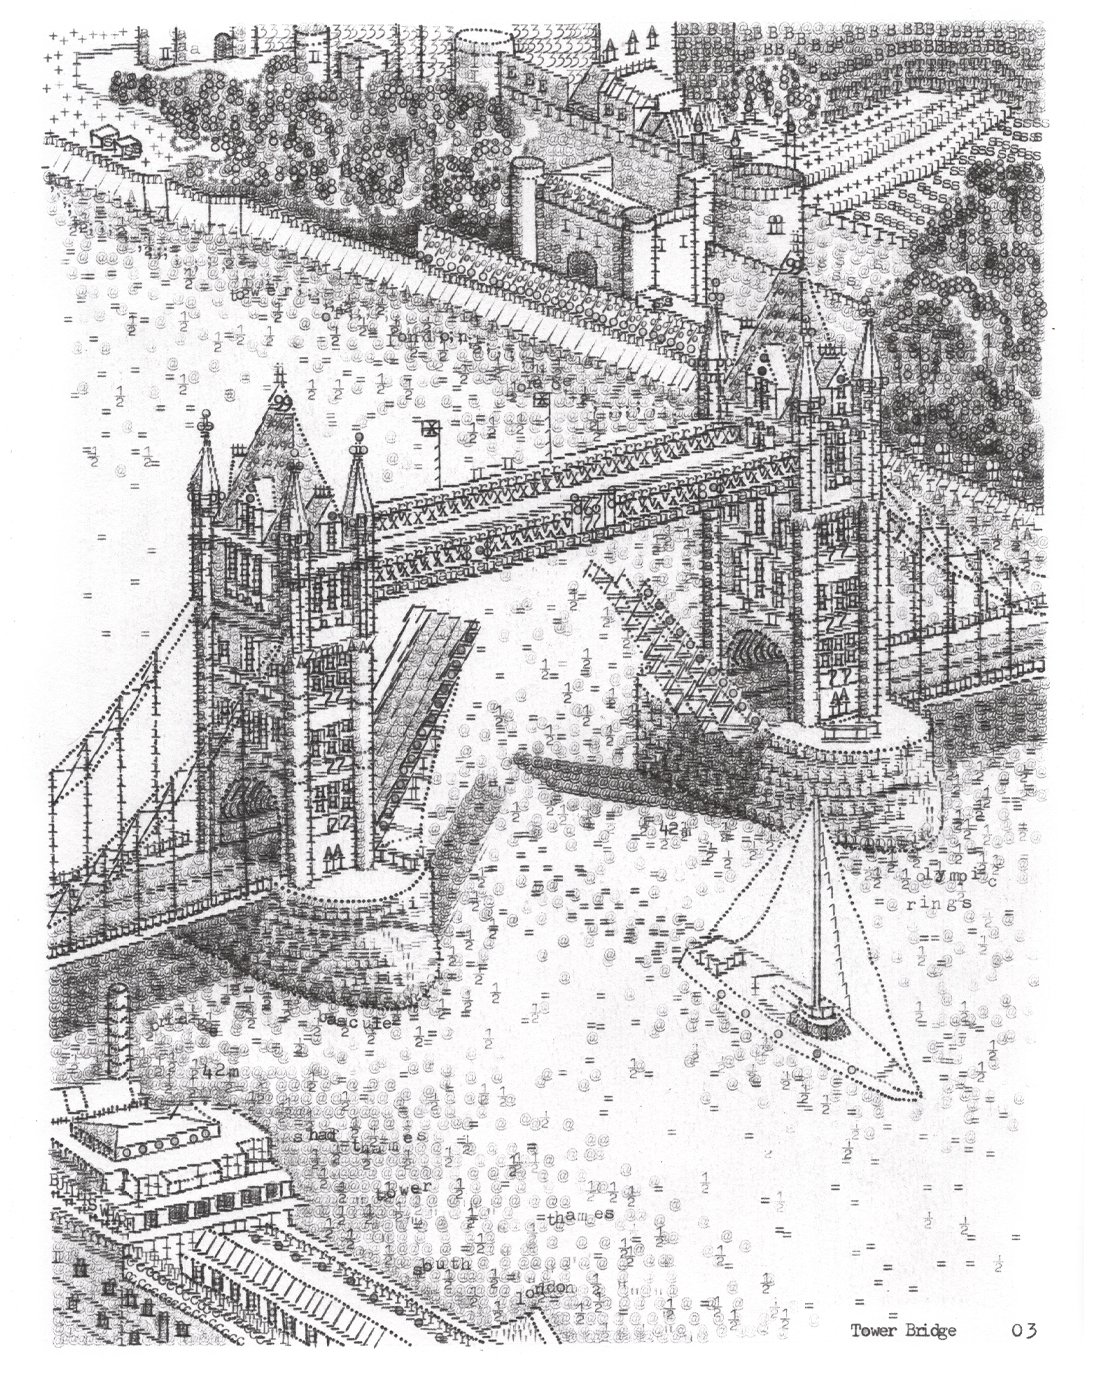 Pin by Jacob on Cool drawings | Landscape pencil drawings, London drawing,  Architecture drawing